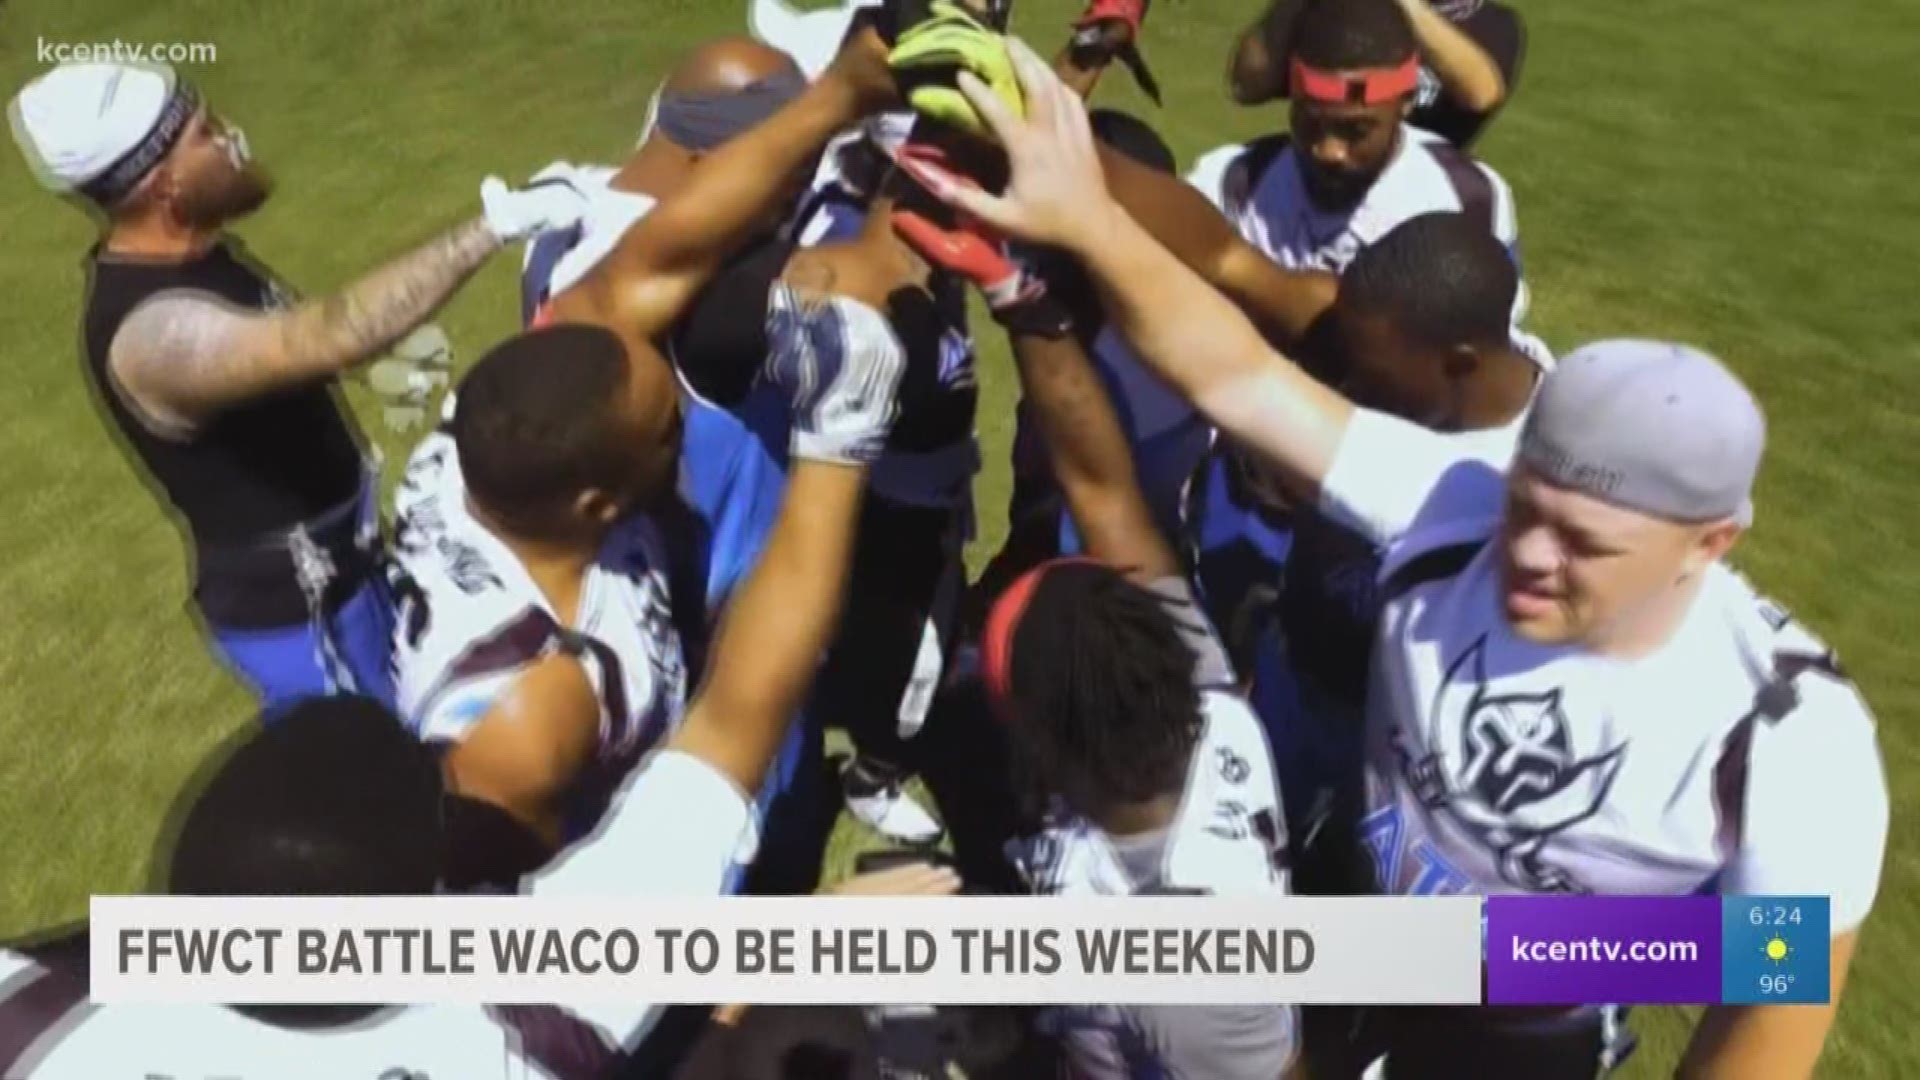 Teams from all over the South will come out to Waco to compete across multiple 8-on-8 and 5-on-5 formats with divisions for youth and adult. All teams are guaranteed three games with pool play, and everyone makes the single-elimination playoffs.